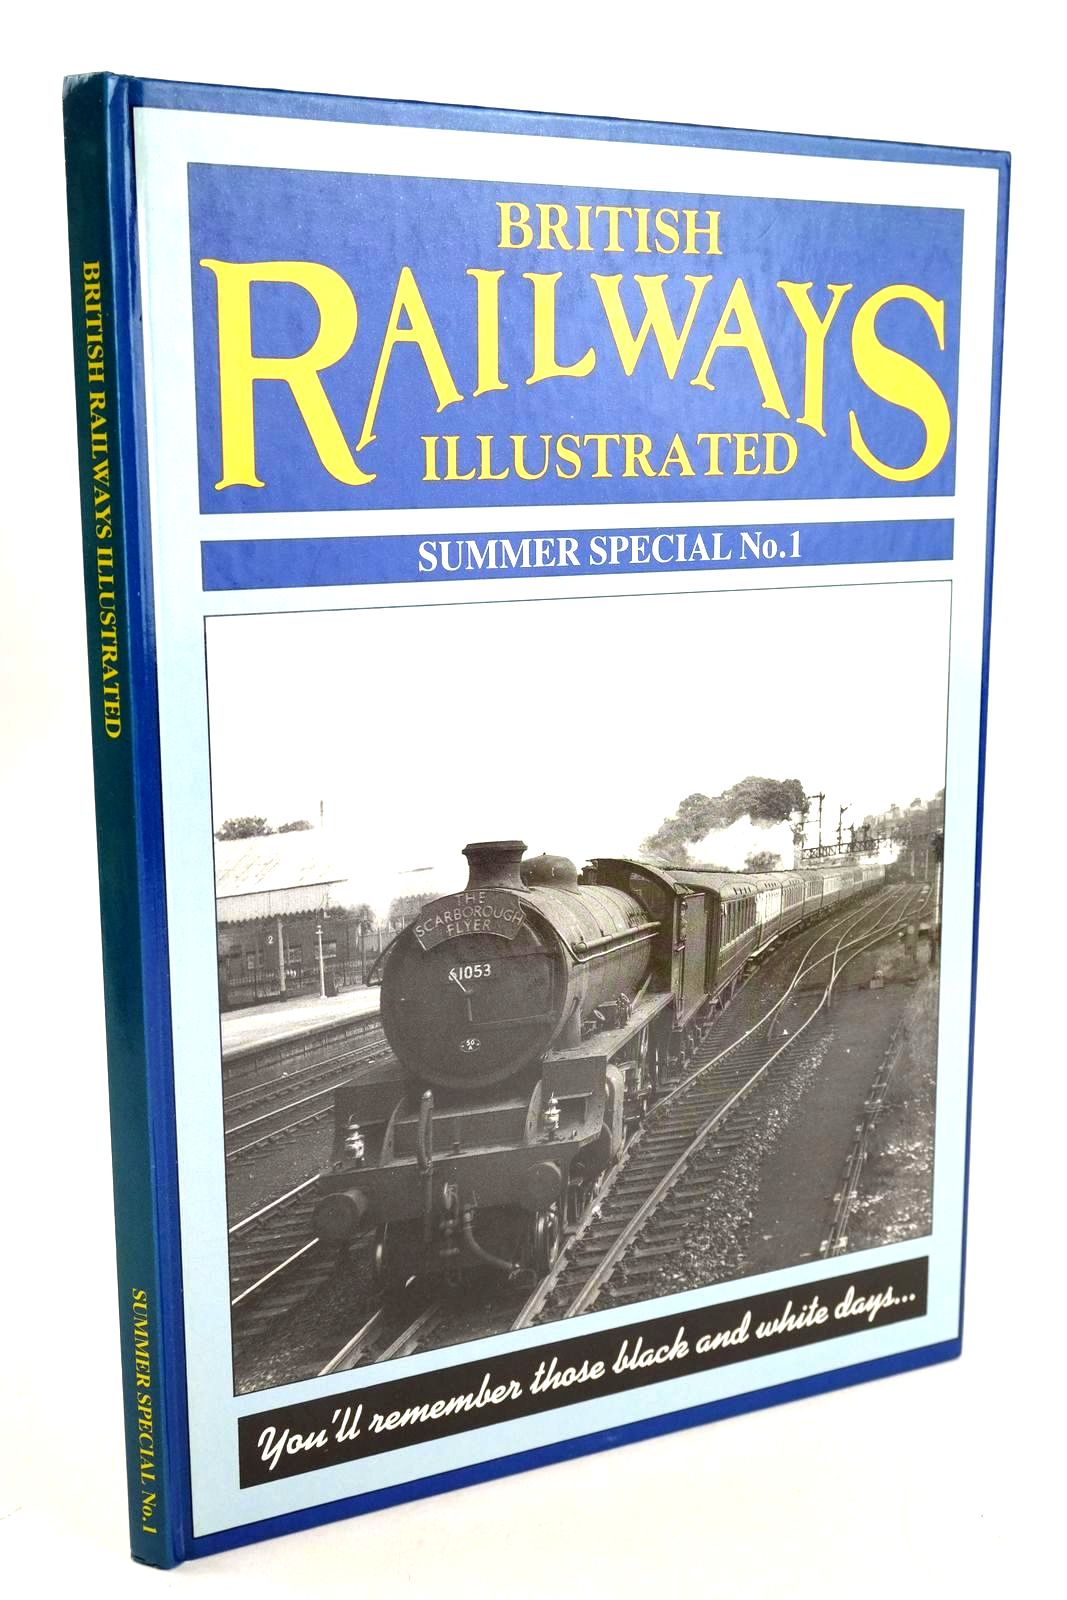 Photo of BRITISH RAILWAYS ILLUSTRATED SUMMER SPECIAL No. 1 published by Irwell Press (STOCK CODE: 1327316)  for sale by Stella & Rose's Books